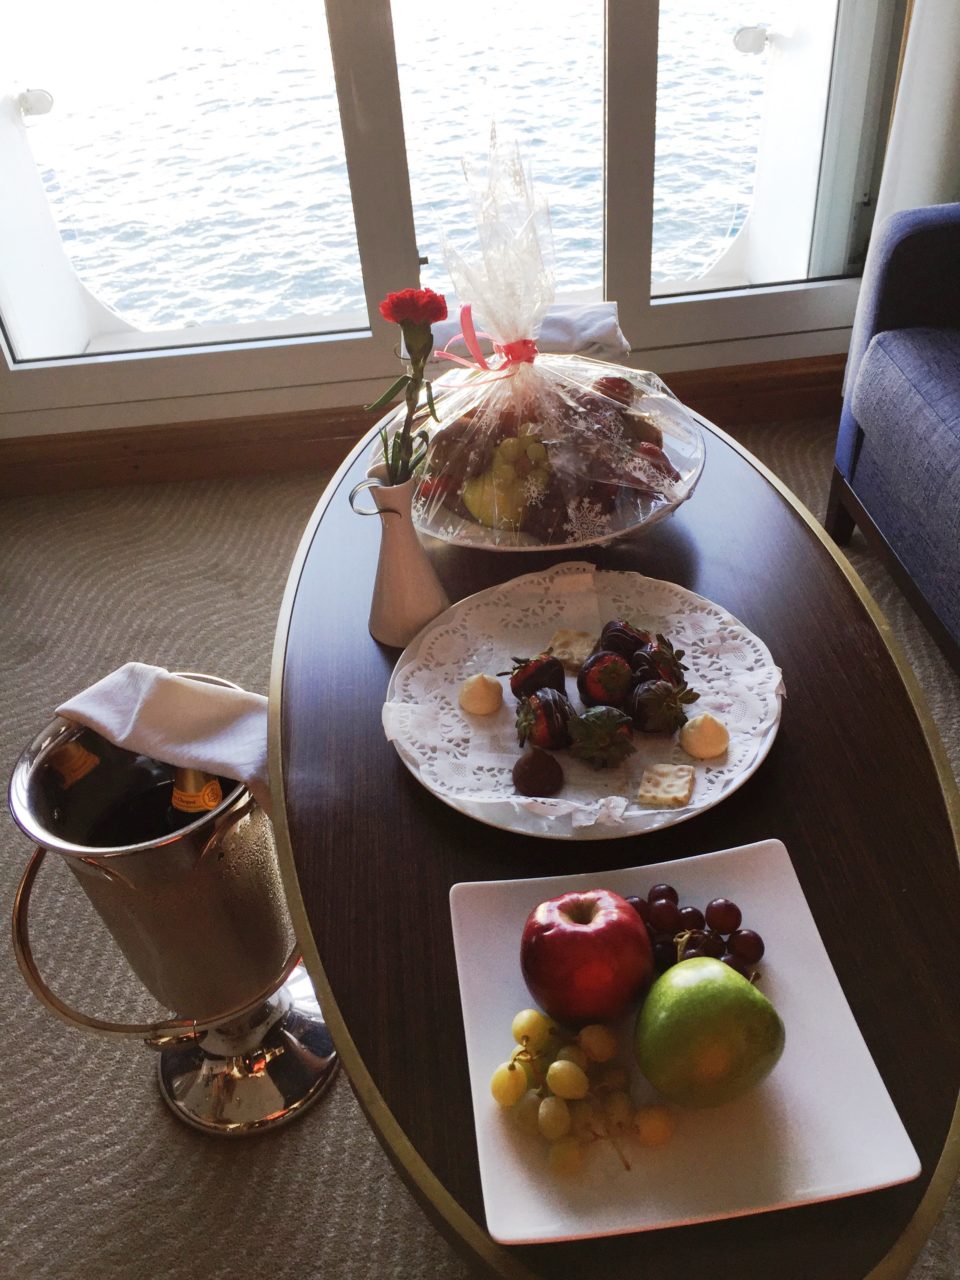 Windstar Cruises ~ Brut Champagne from Maison Veuve Cliquot and dark chocolate-covered strawberries ... my kind of welcome